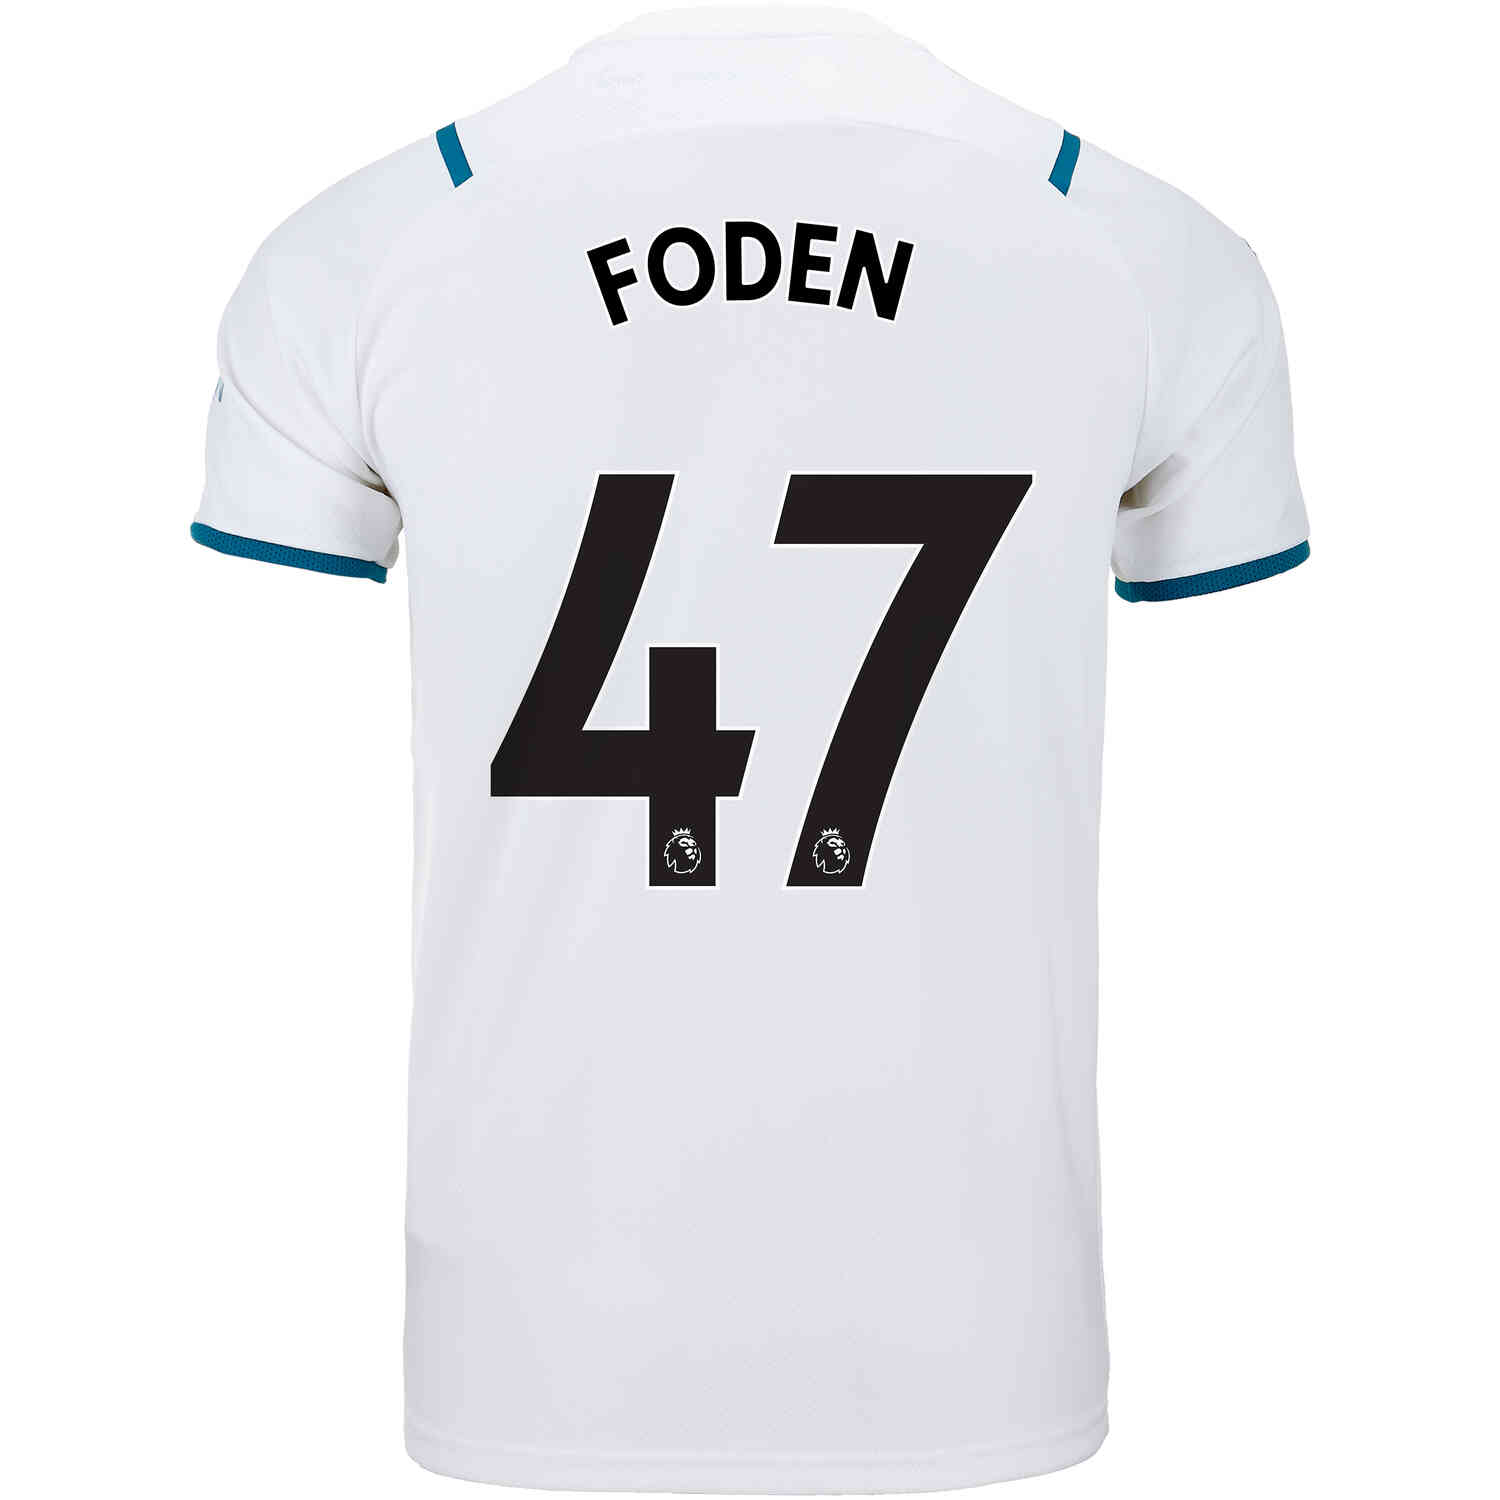 phil foden soccer jersey